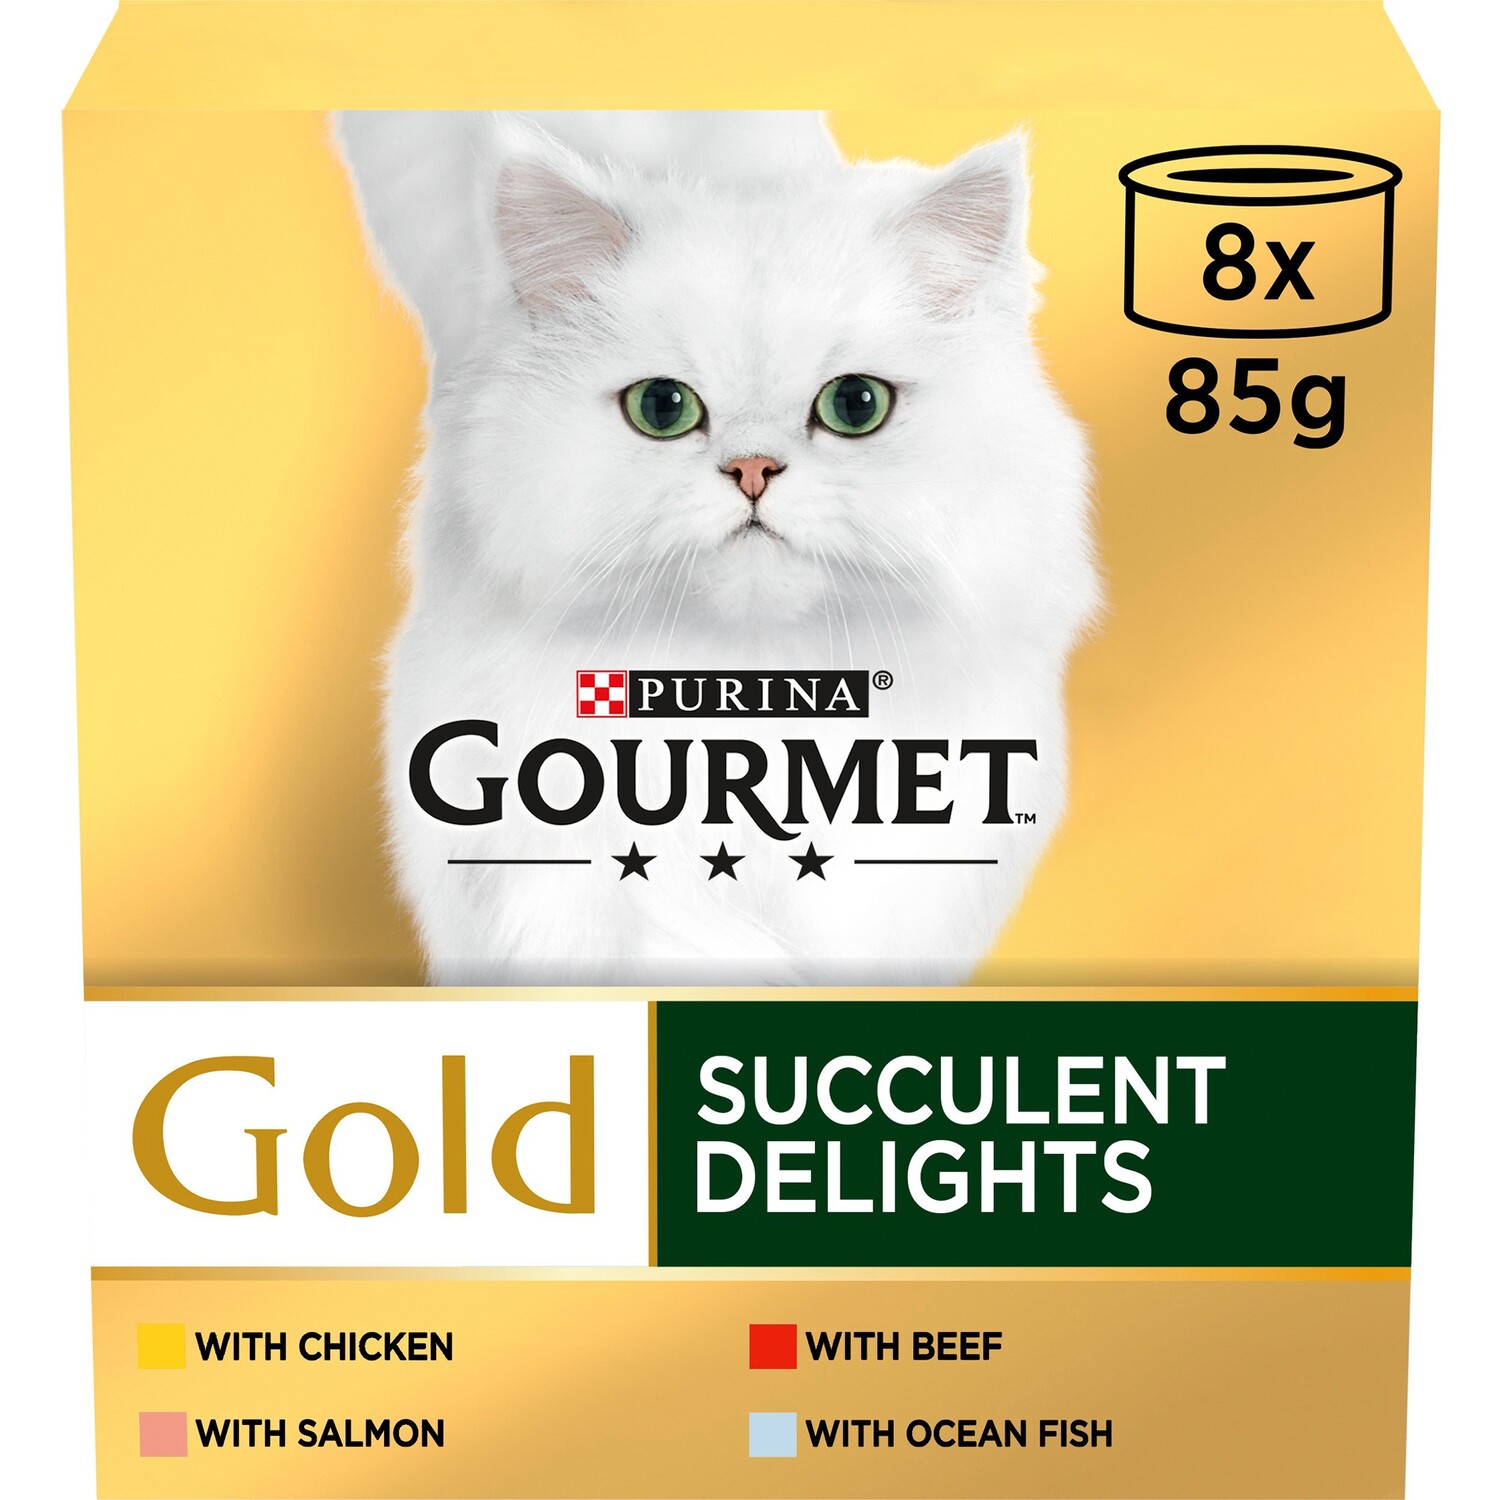 Gourmet Gold Succulent Delights Adult Cat Food Pouches 8 x 85g Image 1